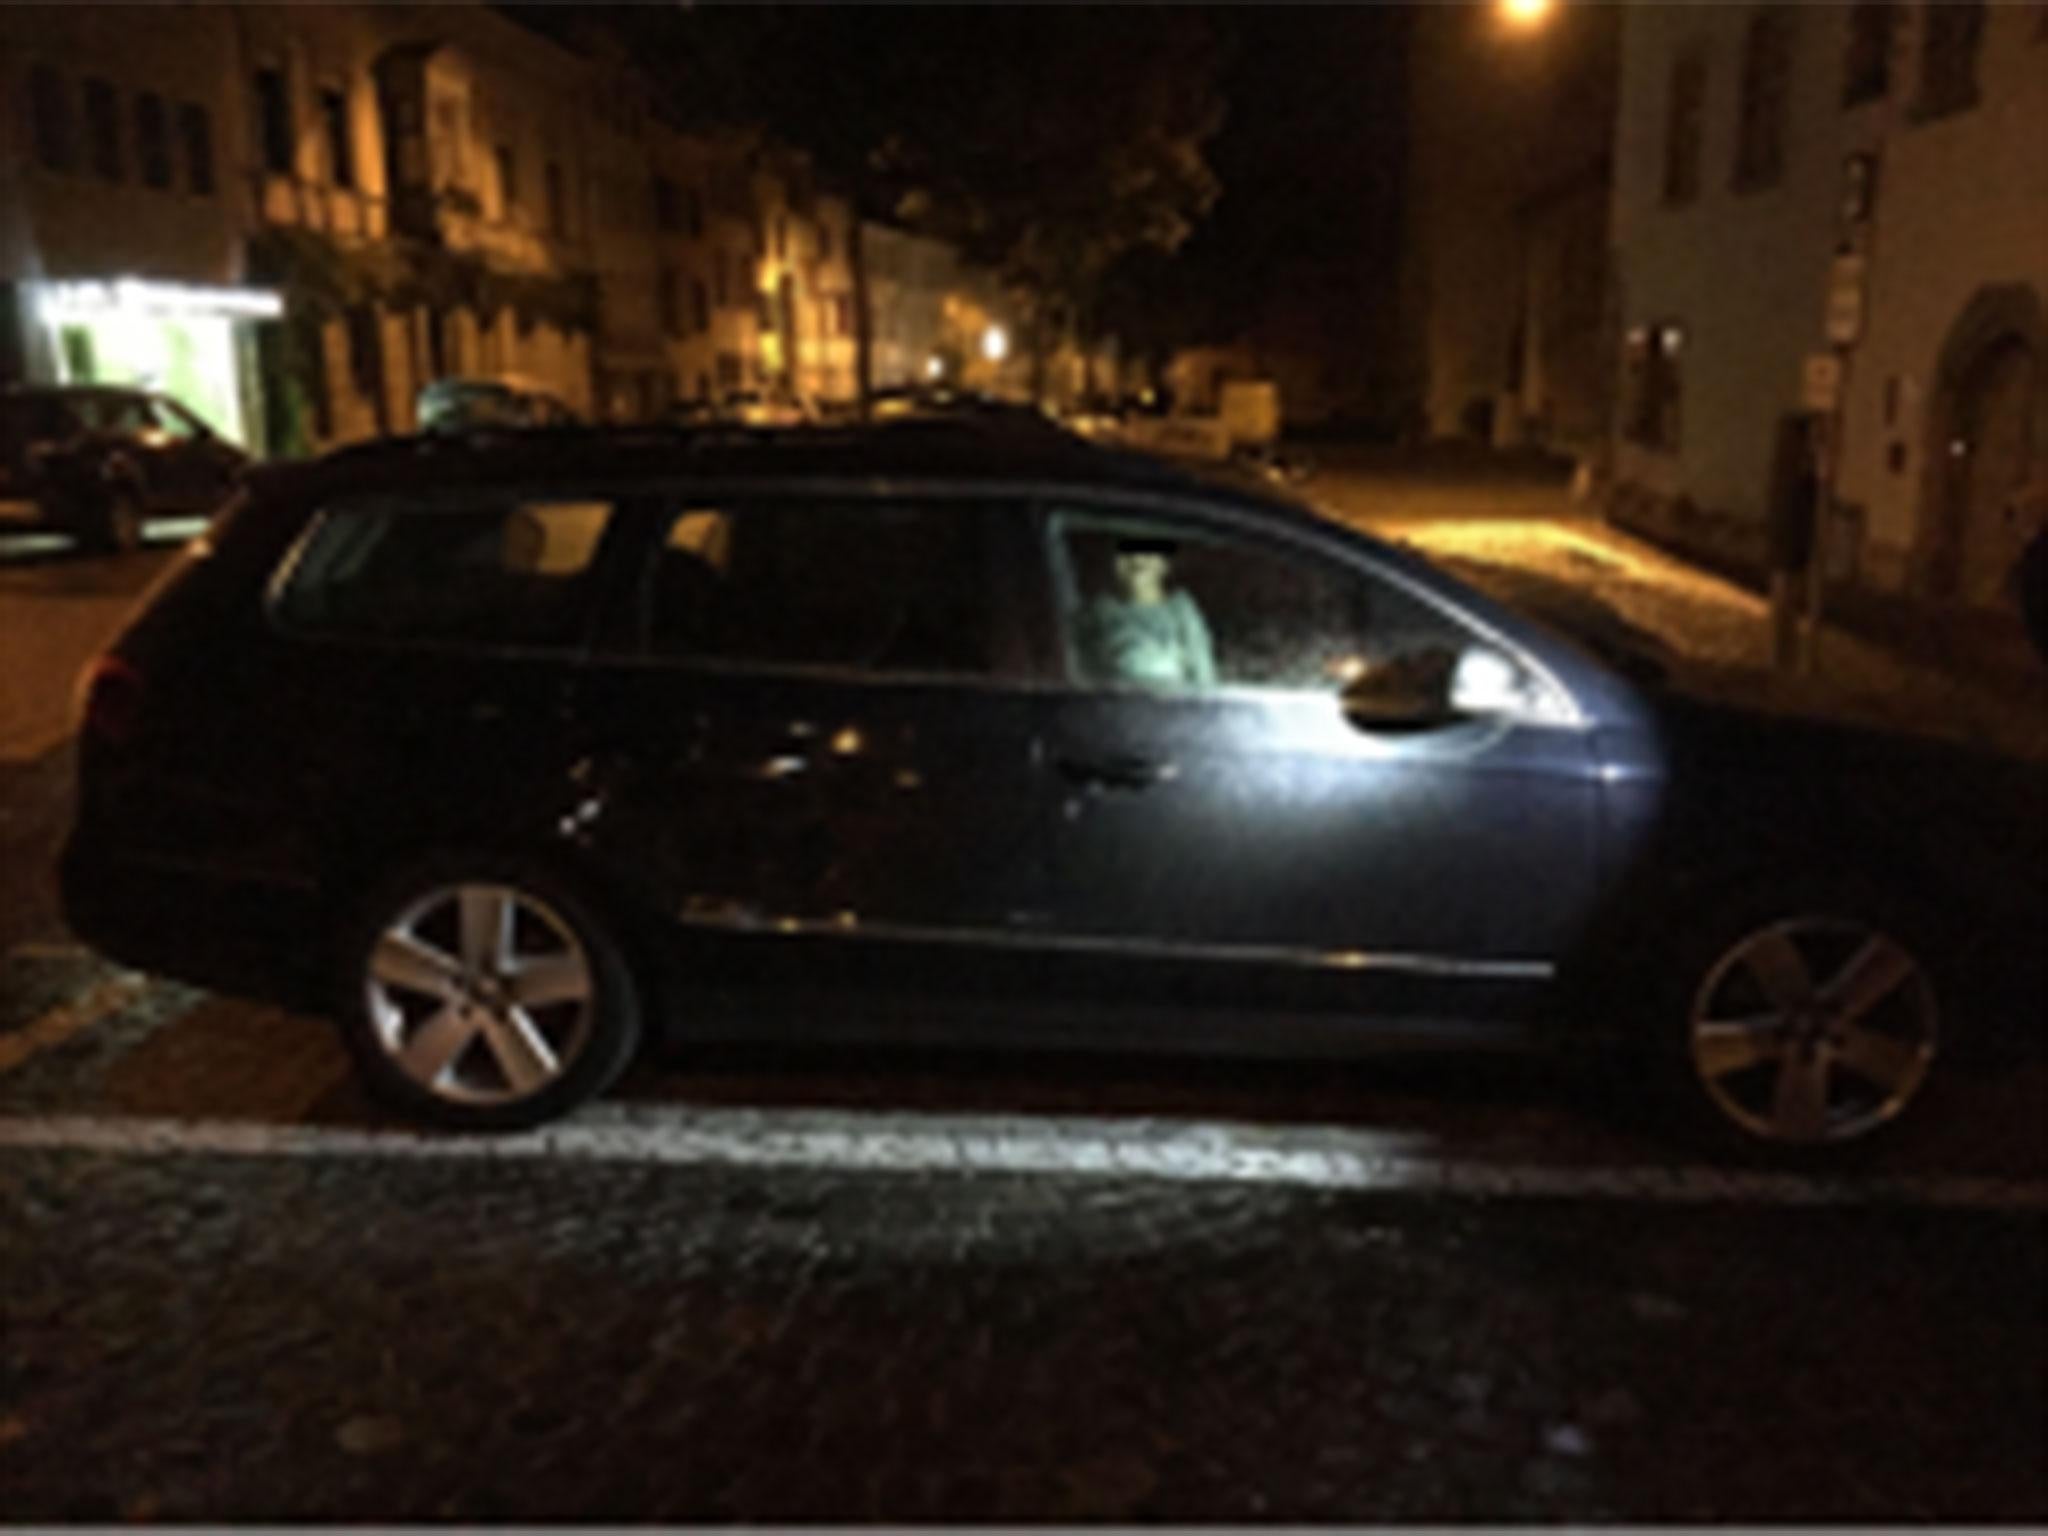 Police photo showing the boy left alone in the car while his mother went clubbing